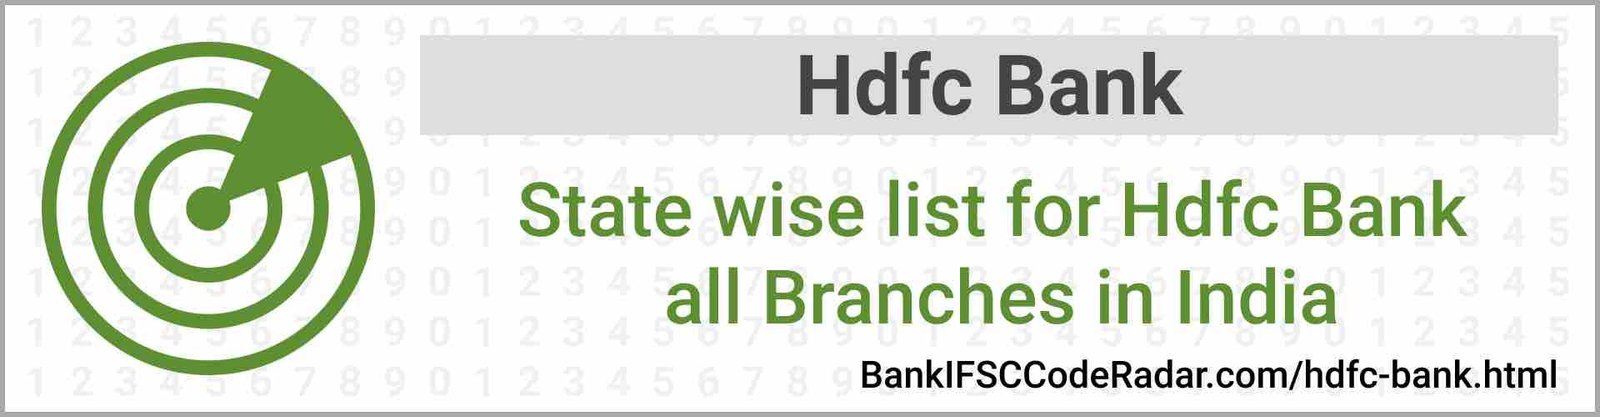 Hdfc Bank All Branches India